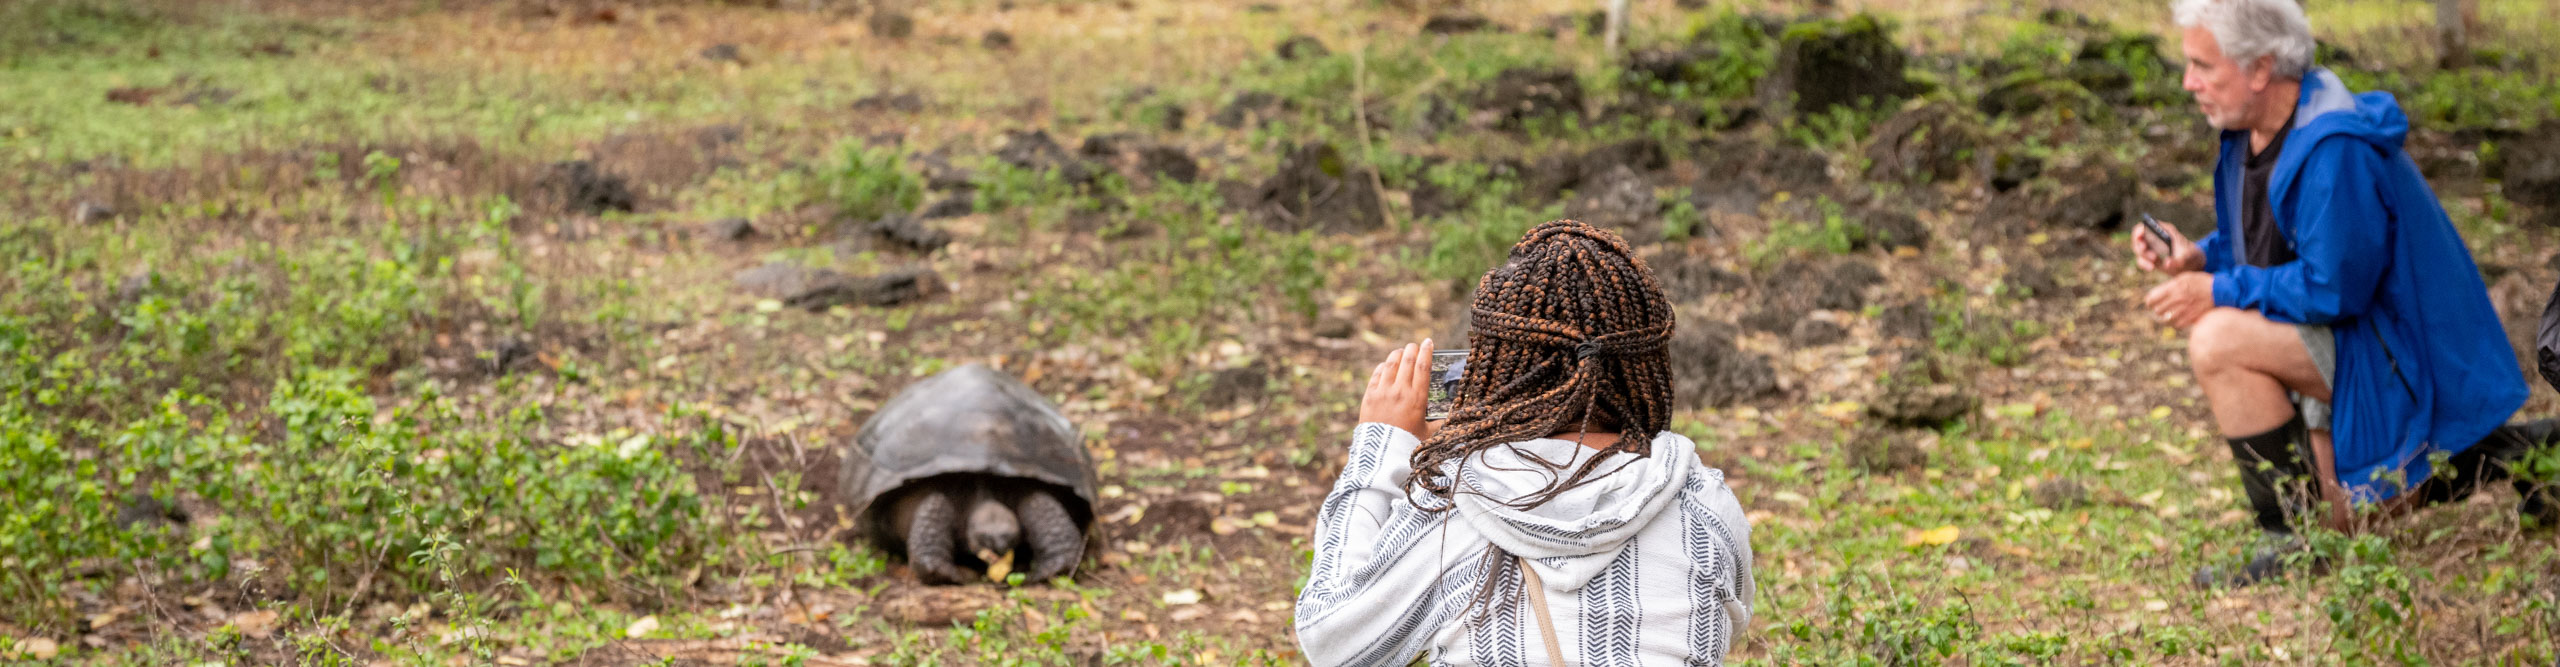 Woman taking pictures of a giant tortoise with her mobile phone in the Galapagos Islands, Ecuador